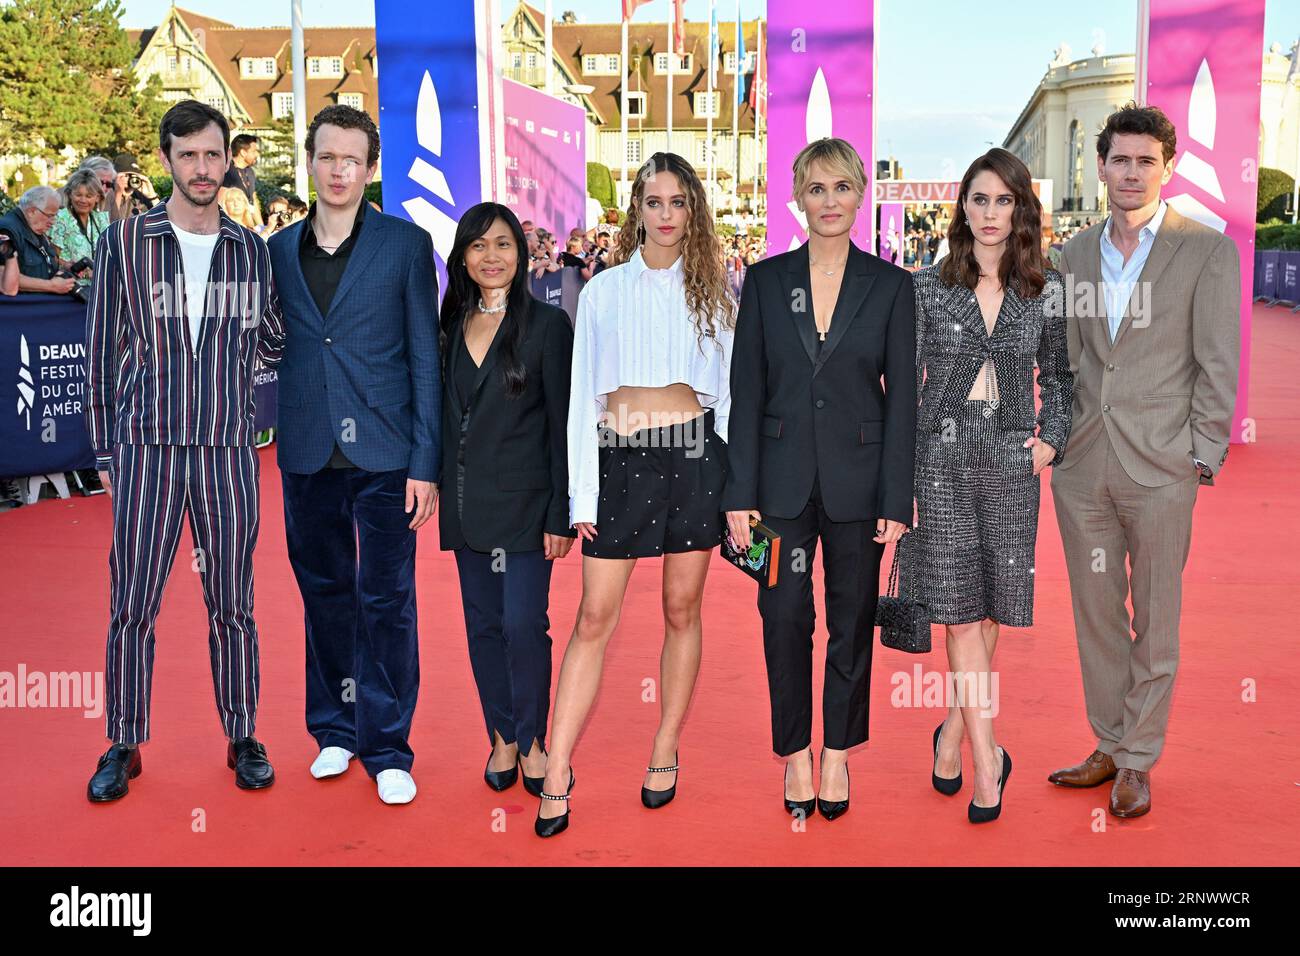 Deauville, France. 02nd Sep, 2023. Richard Sears, Noe Boon, Gina Cailin, Tess Barthelemy, Judith Godreche, Liz Kingsman, Loic Corbery attending the screening of the movie Dogman during the 49th Deauville American Film Festival in Deauville, France on September 2, 2023. Photo by Julien Reynaud/APS-Medias/ABACAPRESS.COM Credit: Abaca Press/Alamy Live News Stock Photo